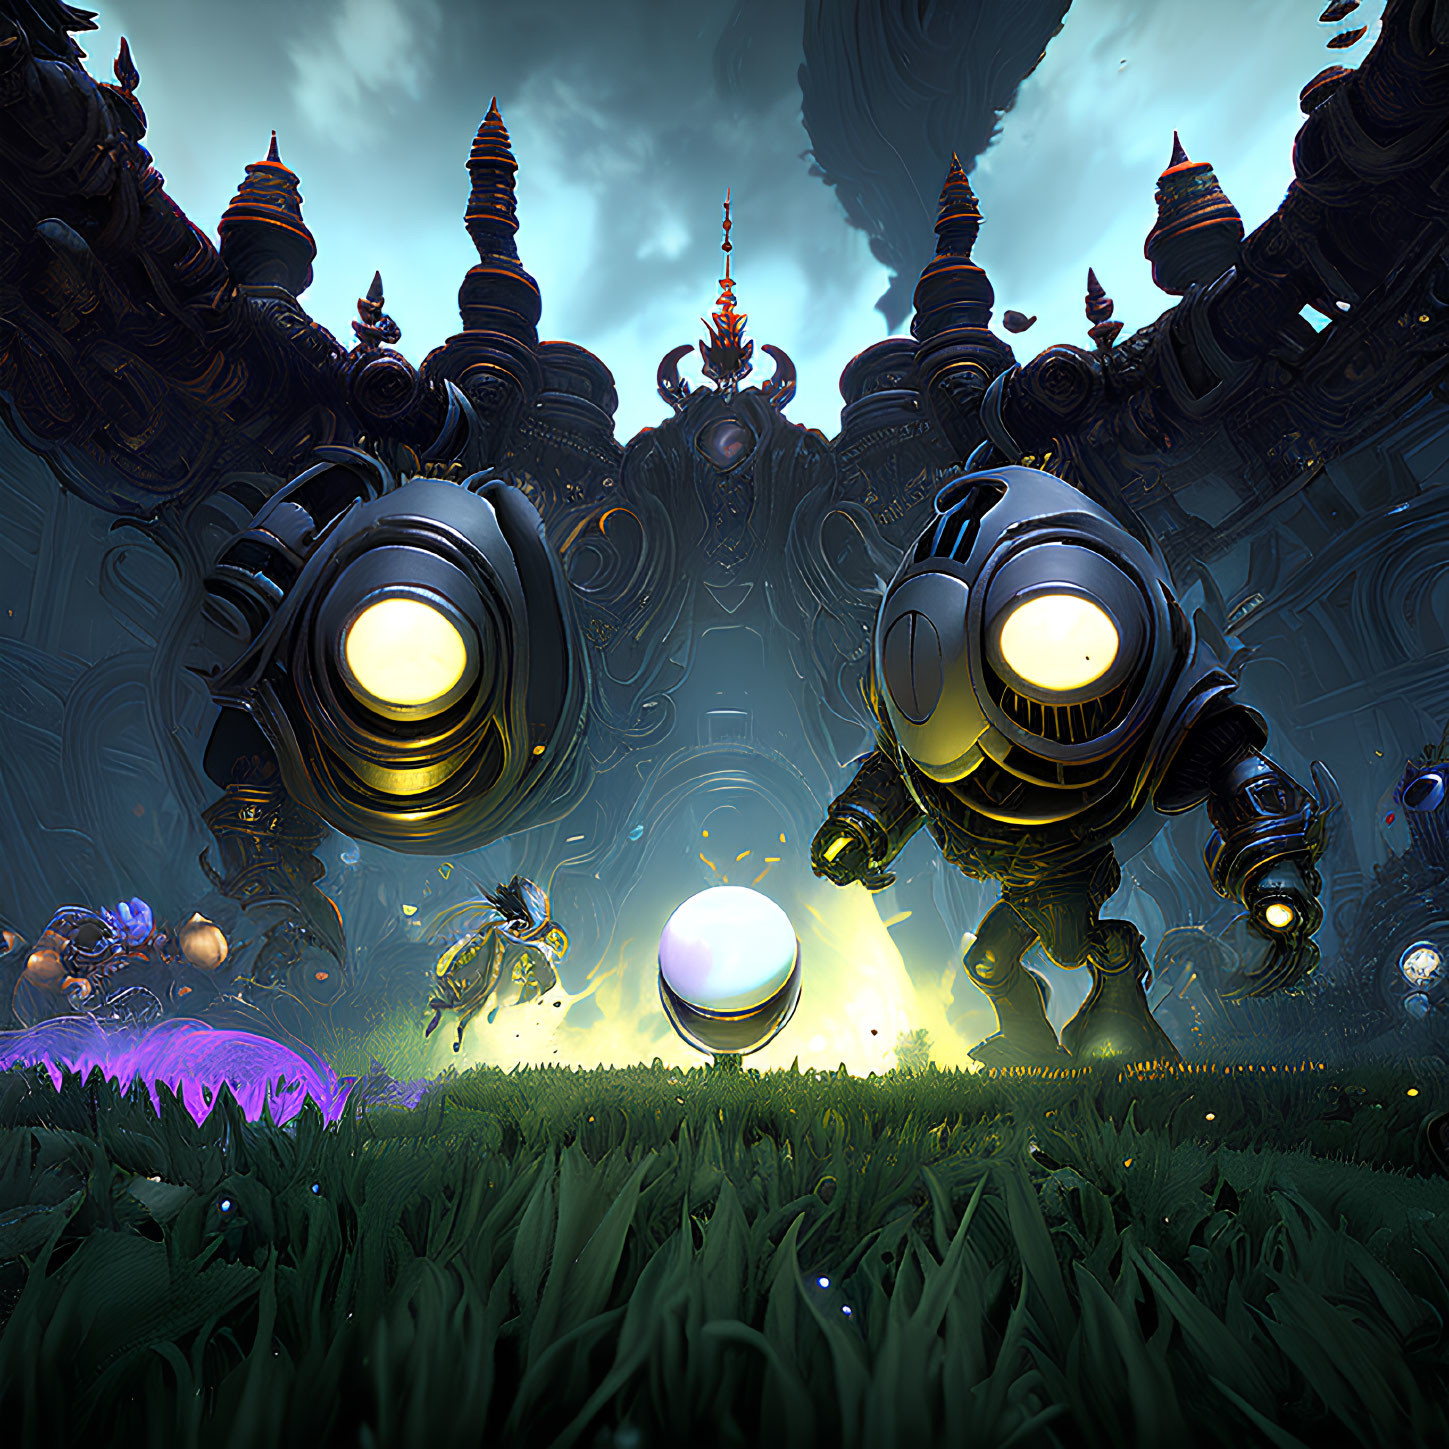 Glowing-eyed robots in mystical forest with alien flora and spires